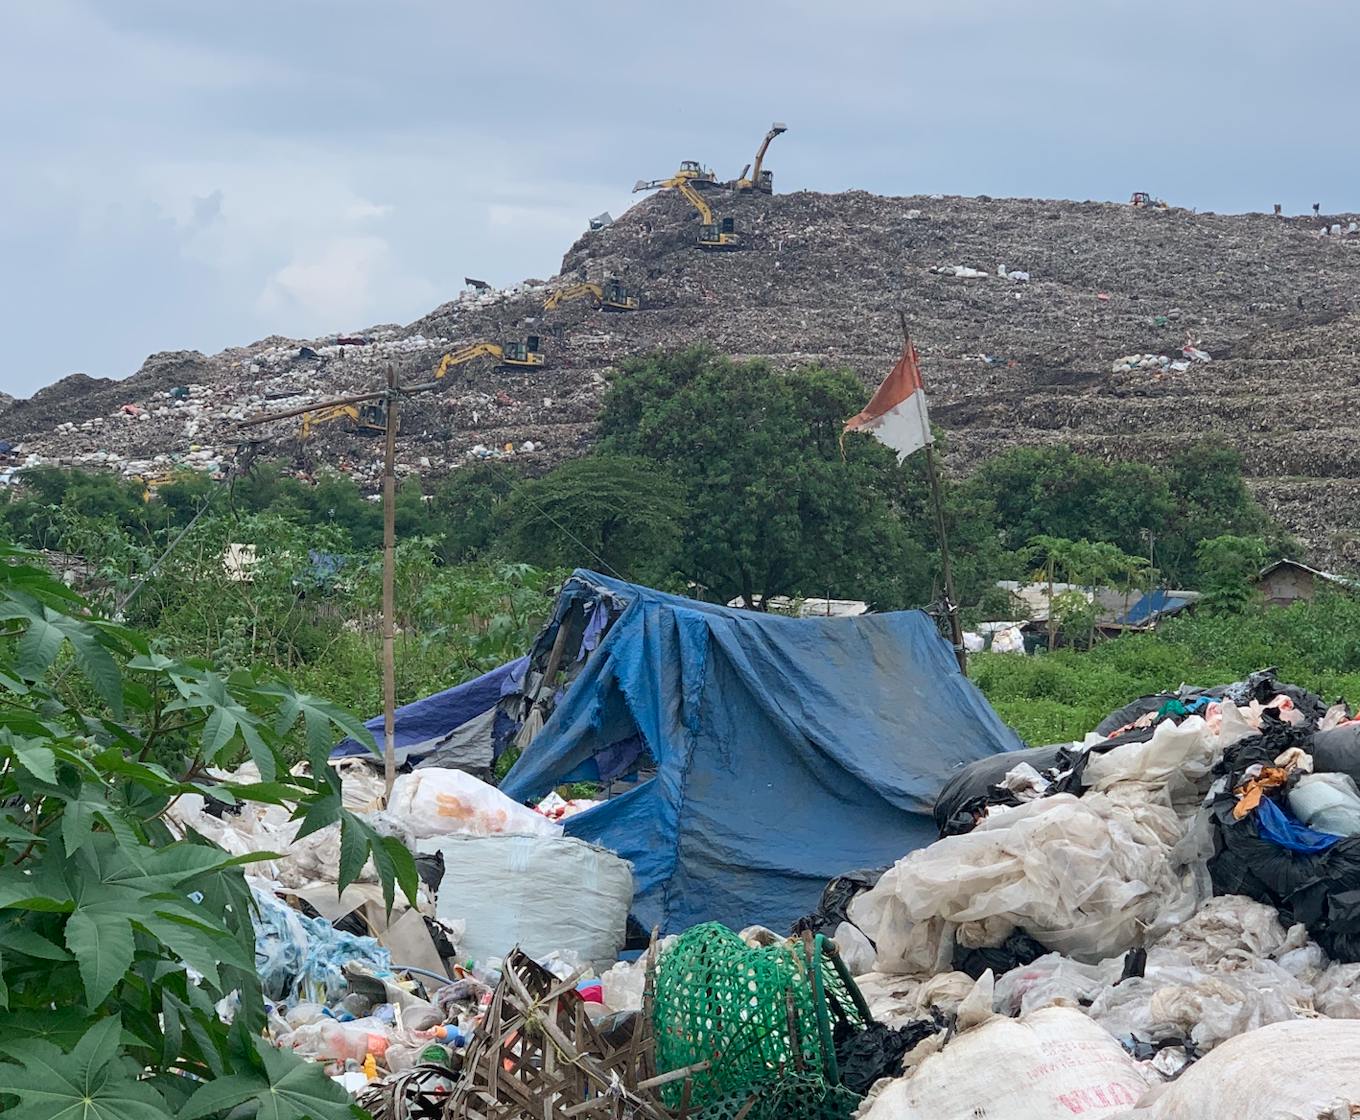 A shack carring the Indonesian flag nestles in greenery beneath the landfill.